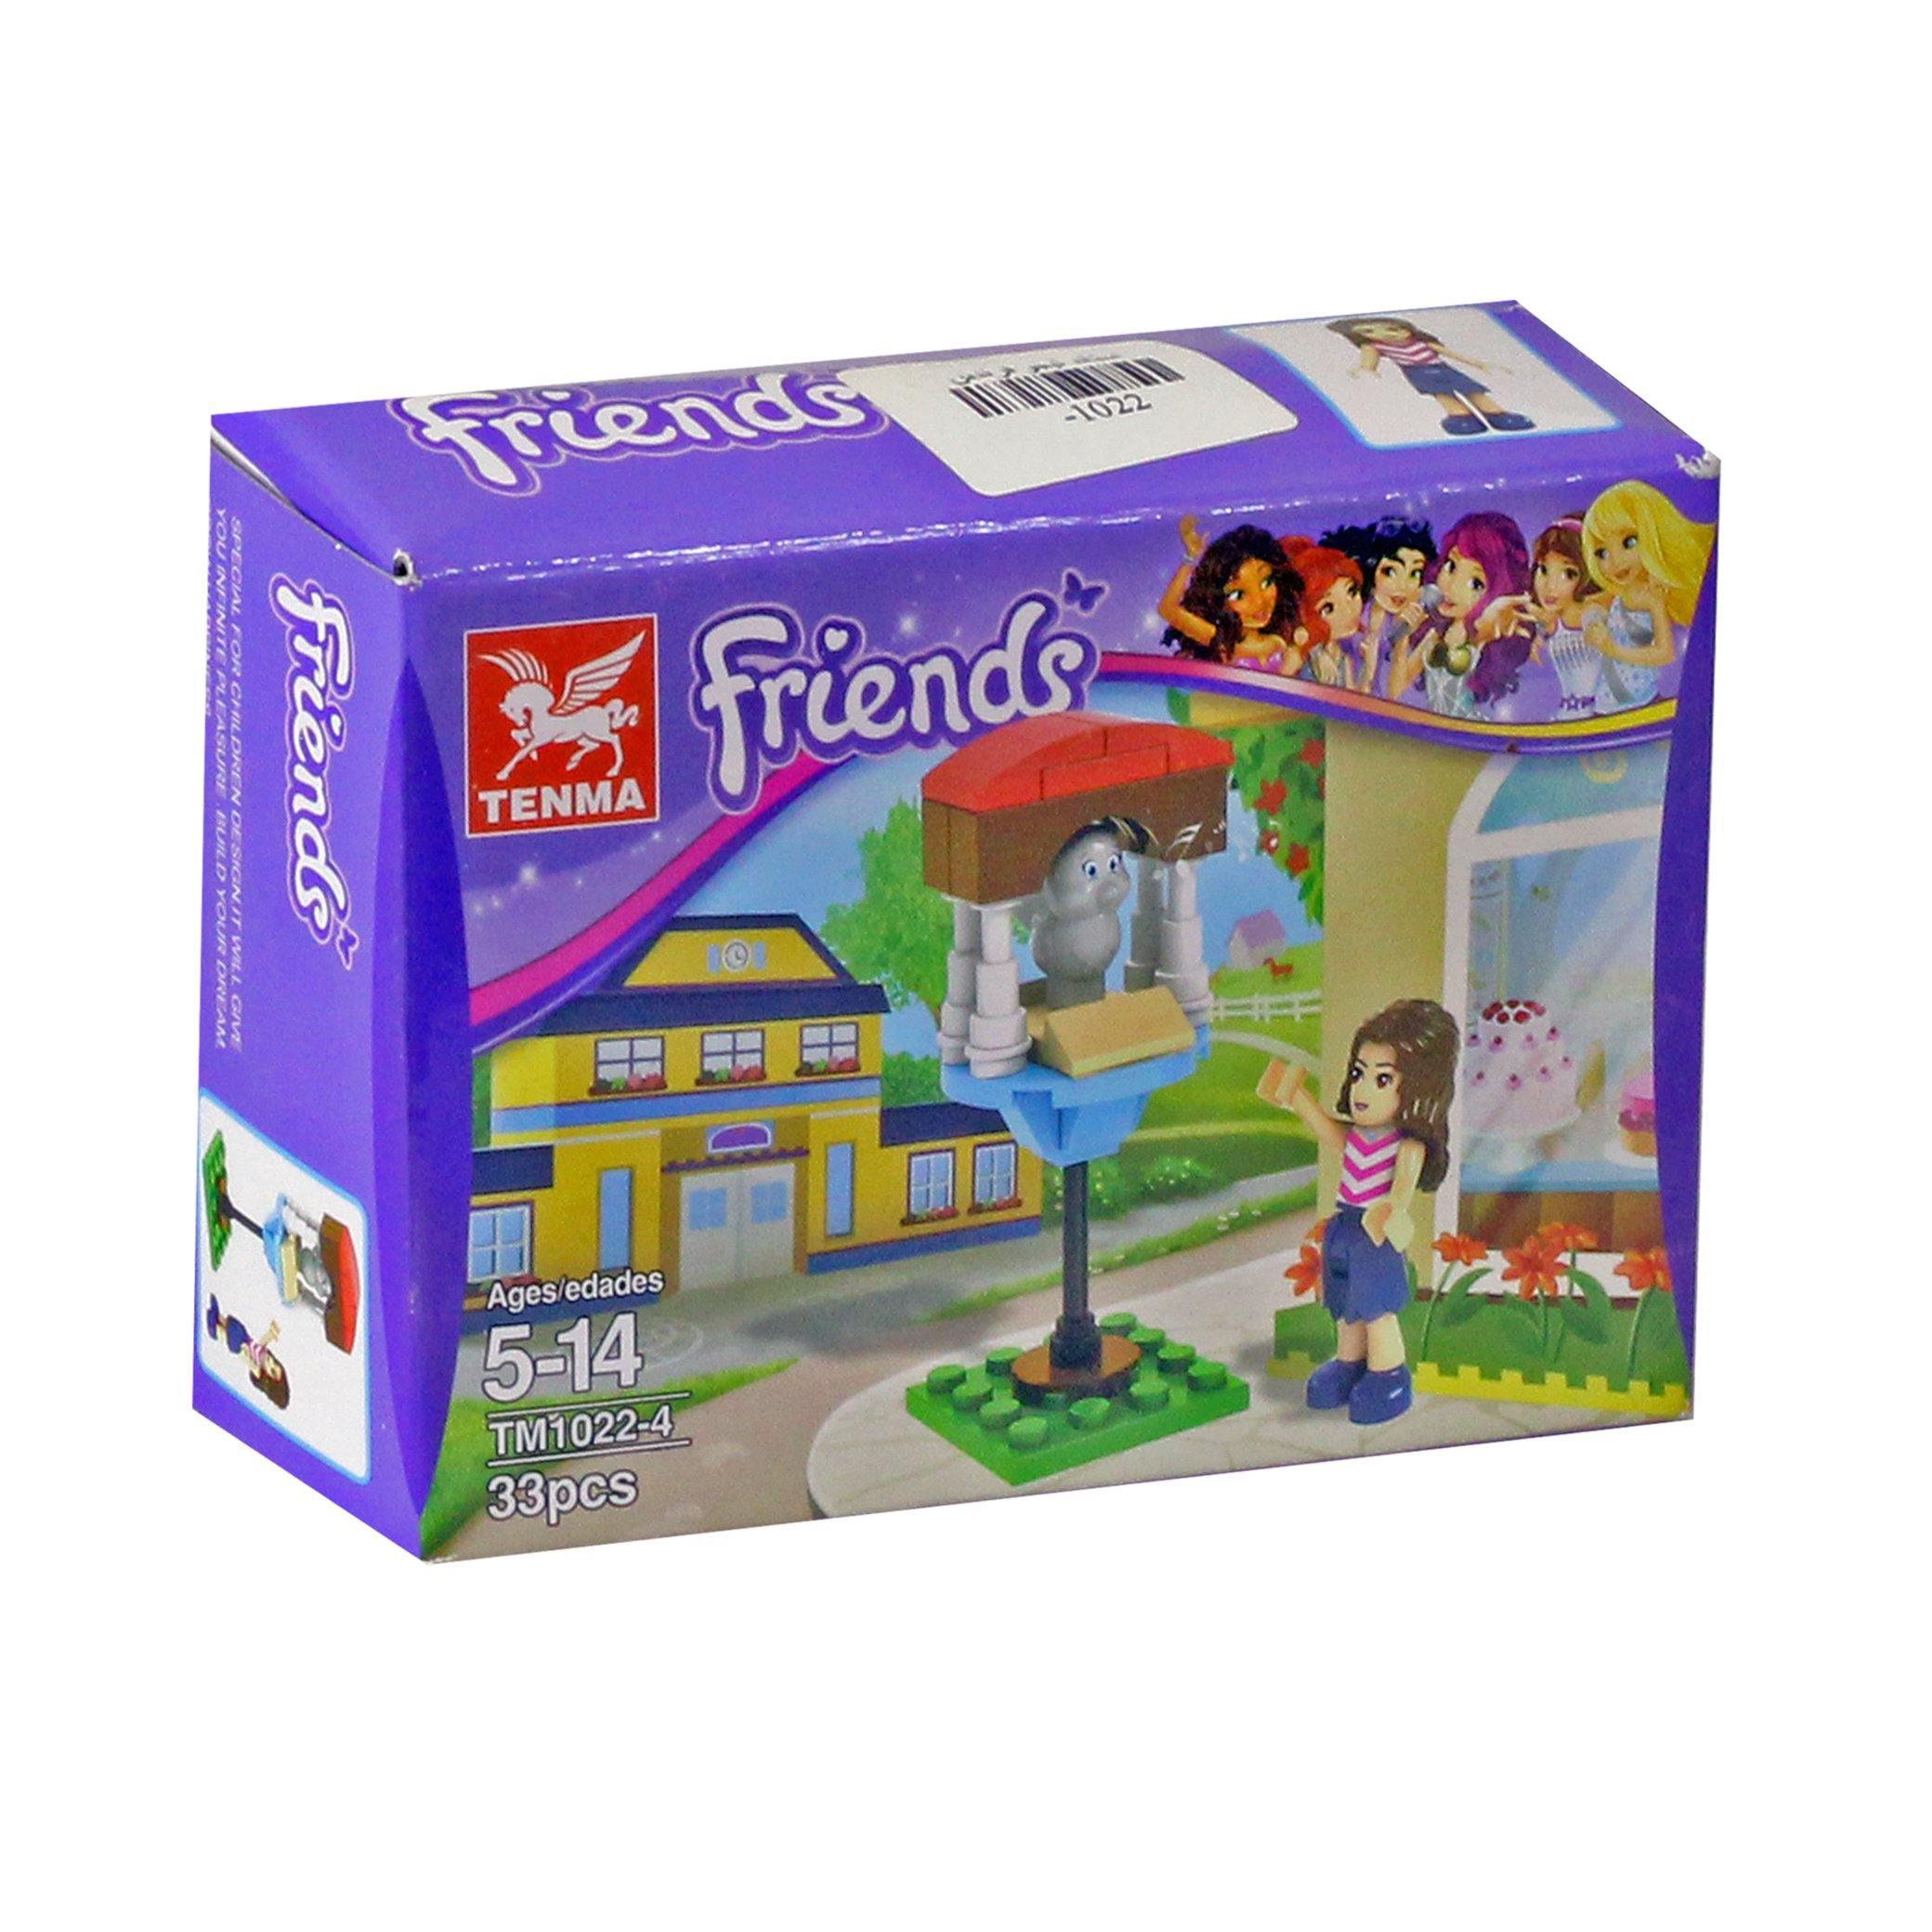 Tenma Friends 1022-4 Building Blocks 33 Pieces - BumbleToys - 5-7 Years, Girls, LEGO, Toy Land